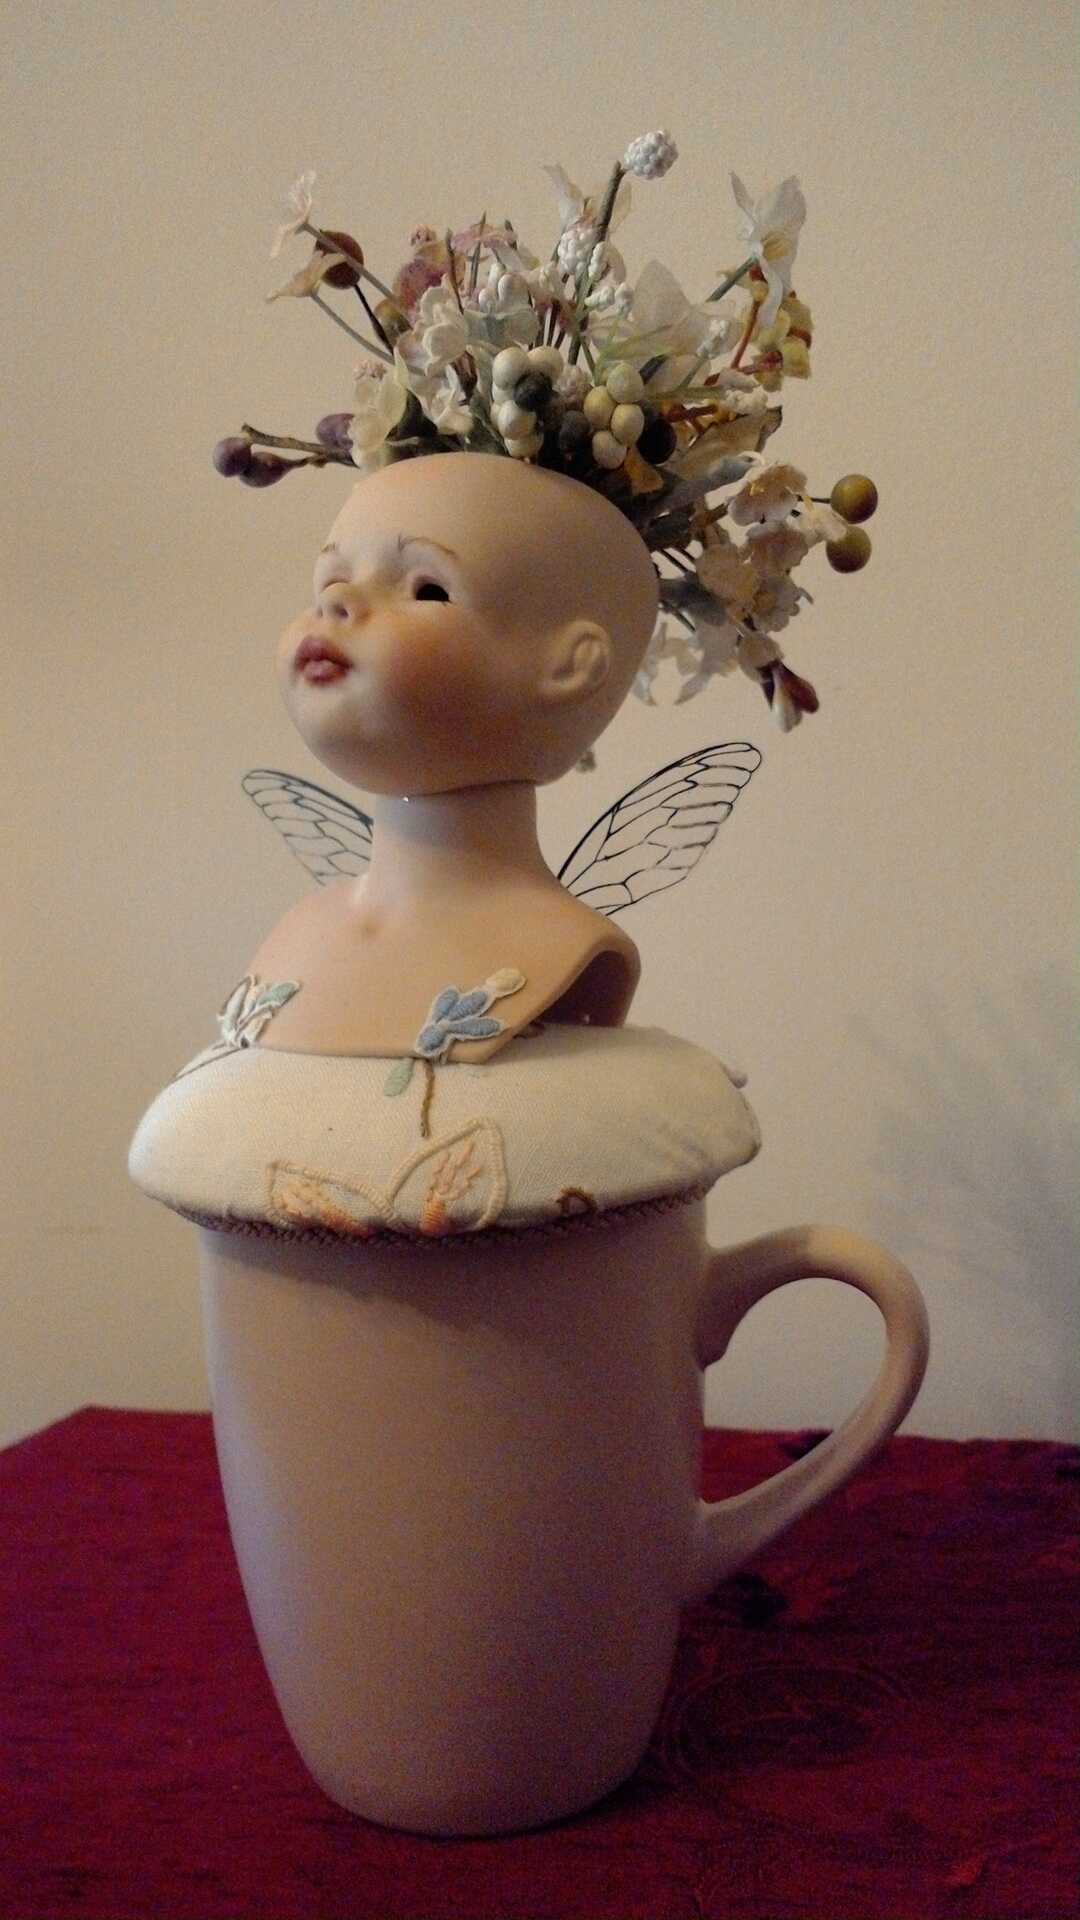 Sculpture "Finding the Way Back III" by Libby Bloxham. The head and shoulders of a porcelain doll are posed atop a rose pink drinking mug, on a round white fabric cushion with an embroidered flower pattern. The doll has no hair affixed, but a large cluster of flowers sprout wildly from her crown. Her head is raised with a proud expression, and acetate insect wings rise from her back.